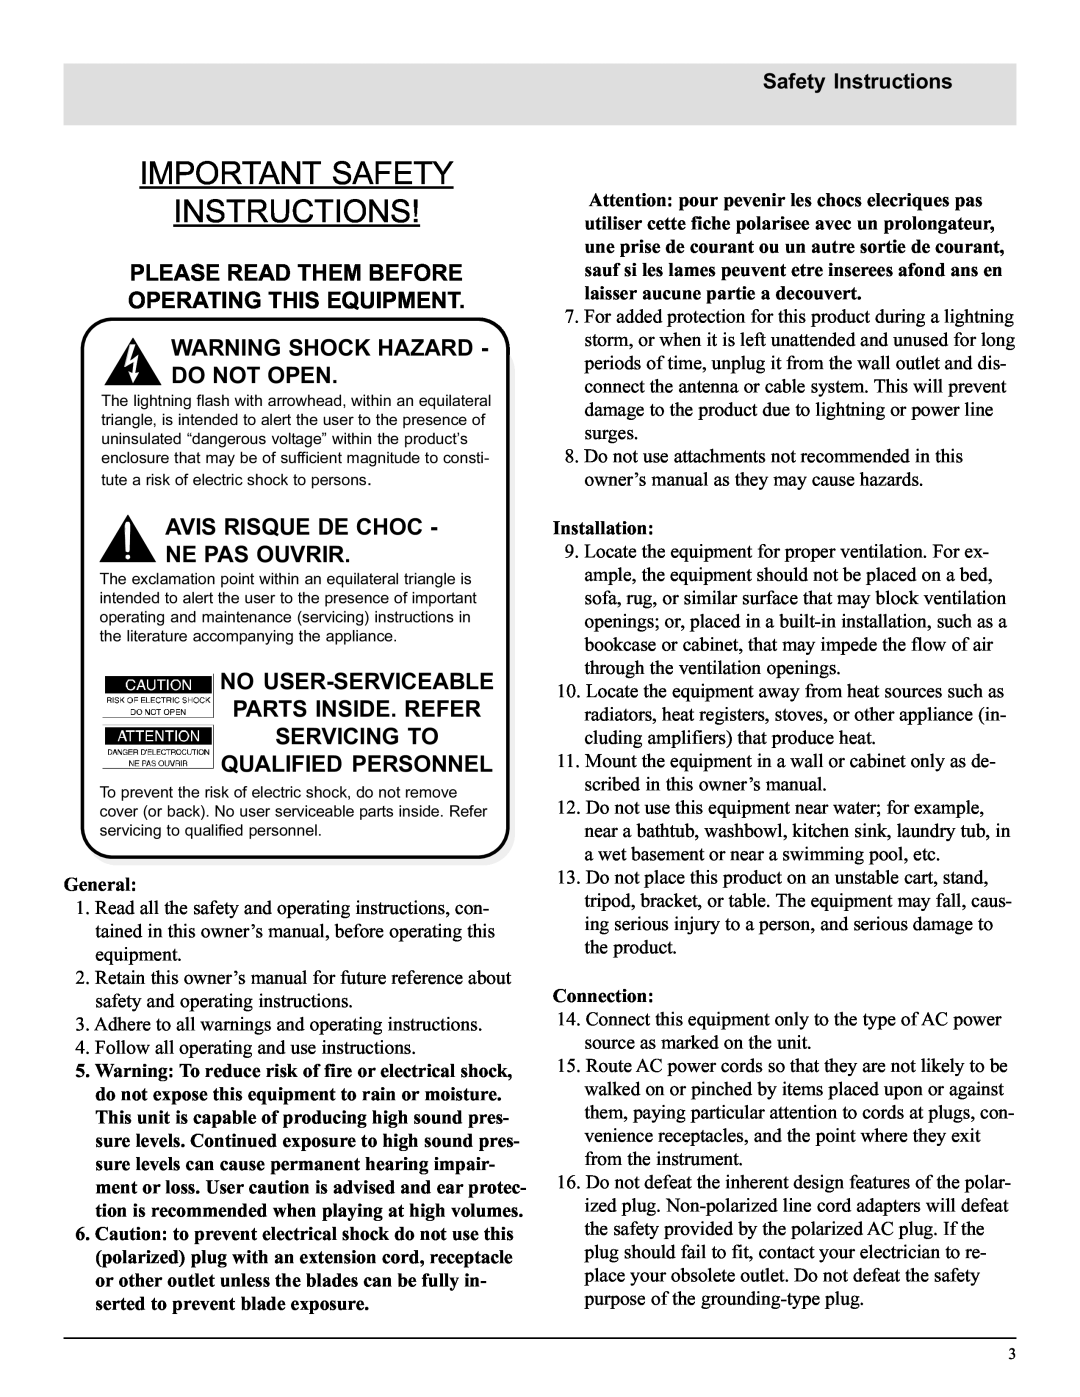 McIntosh MA6500 manual Important Safety Instructions, Please Read Them Before Operating This Equipment, No User-Serviceable 